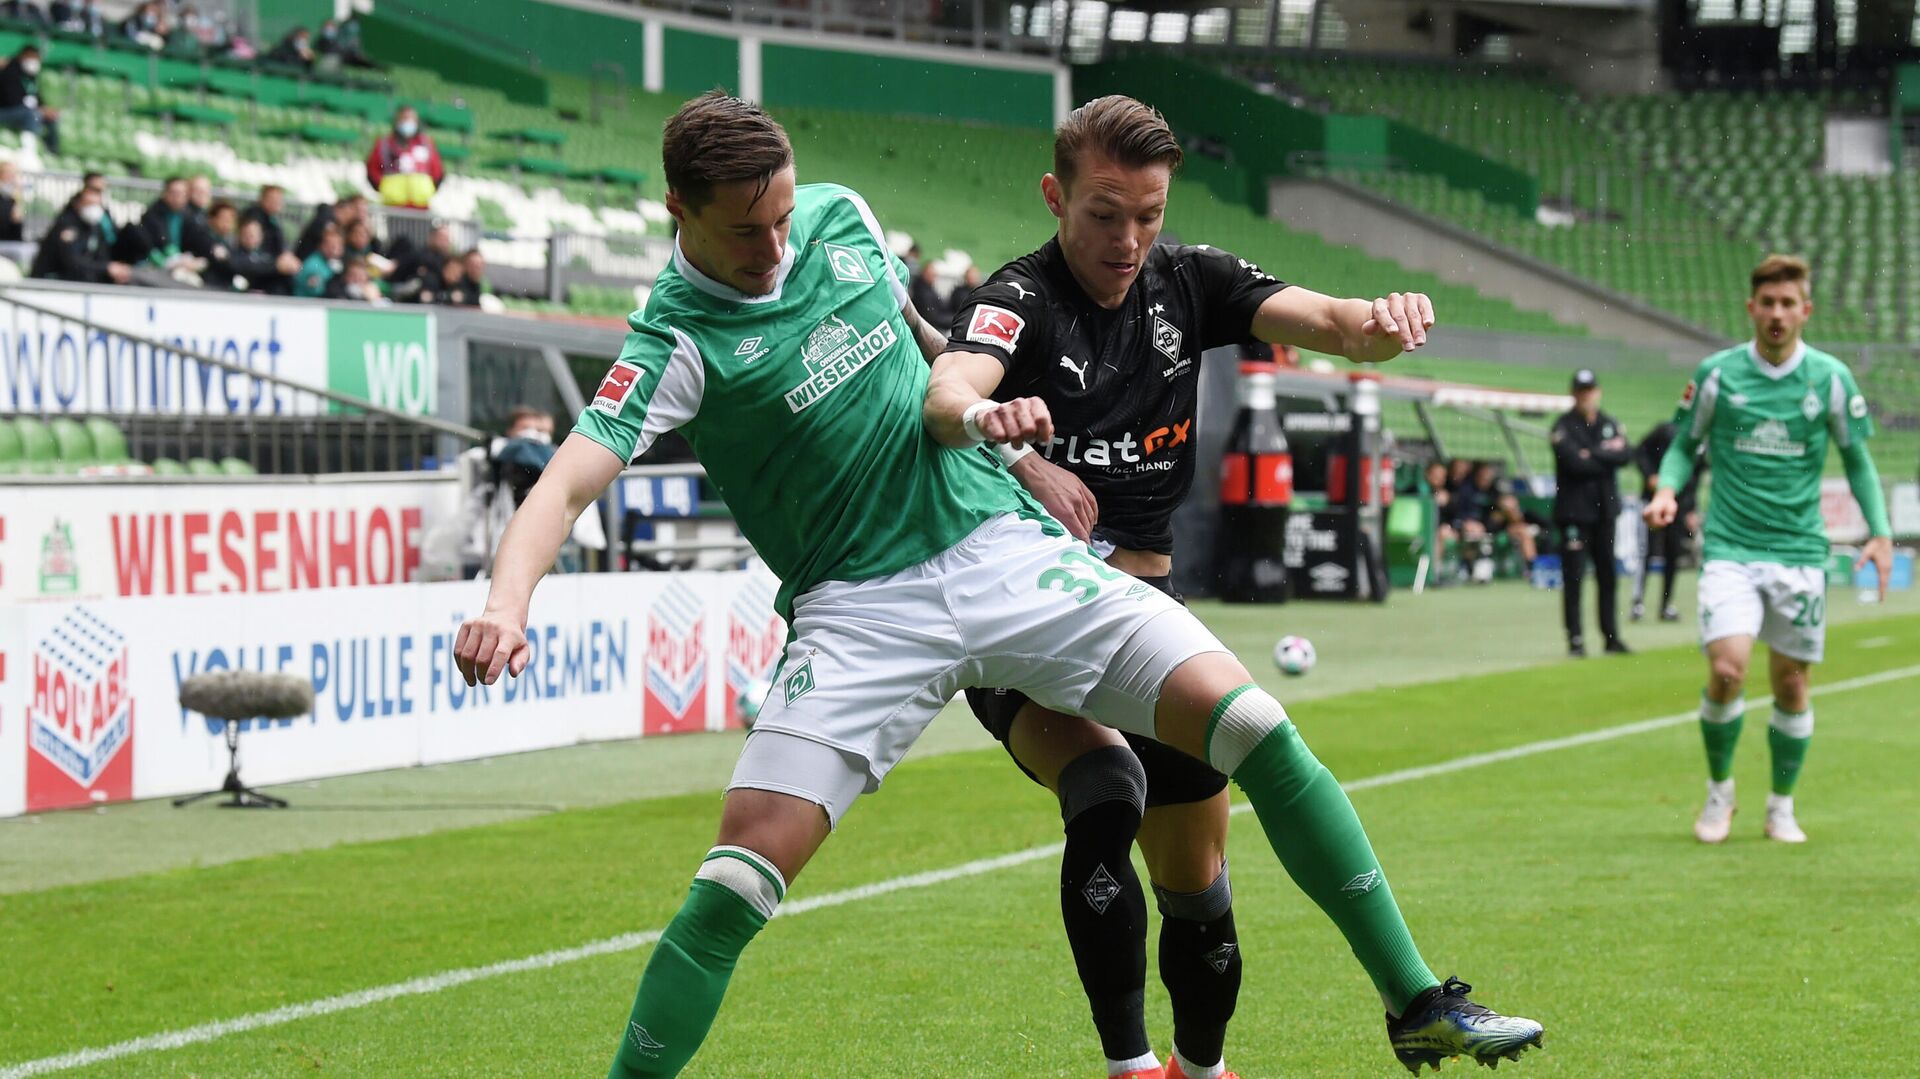 Soccer Football - Bundesliga - Werder Bremen v Borussia Moenchengladbach - Weser-Stadion, Bremen, Germany - May 22, 2021  Werder Bremen's Marco Friedl in action with Borussia Moenchengladbach's Hannes Wolf Pool via REUTERS/Fabian Bimmer DFL regulations prohibit any use of photographs as image sequences and/or quasi-video. - РИА Новости, 1920, 22.05.2021